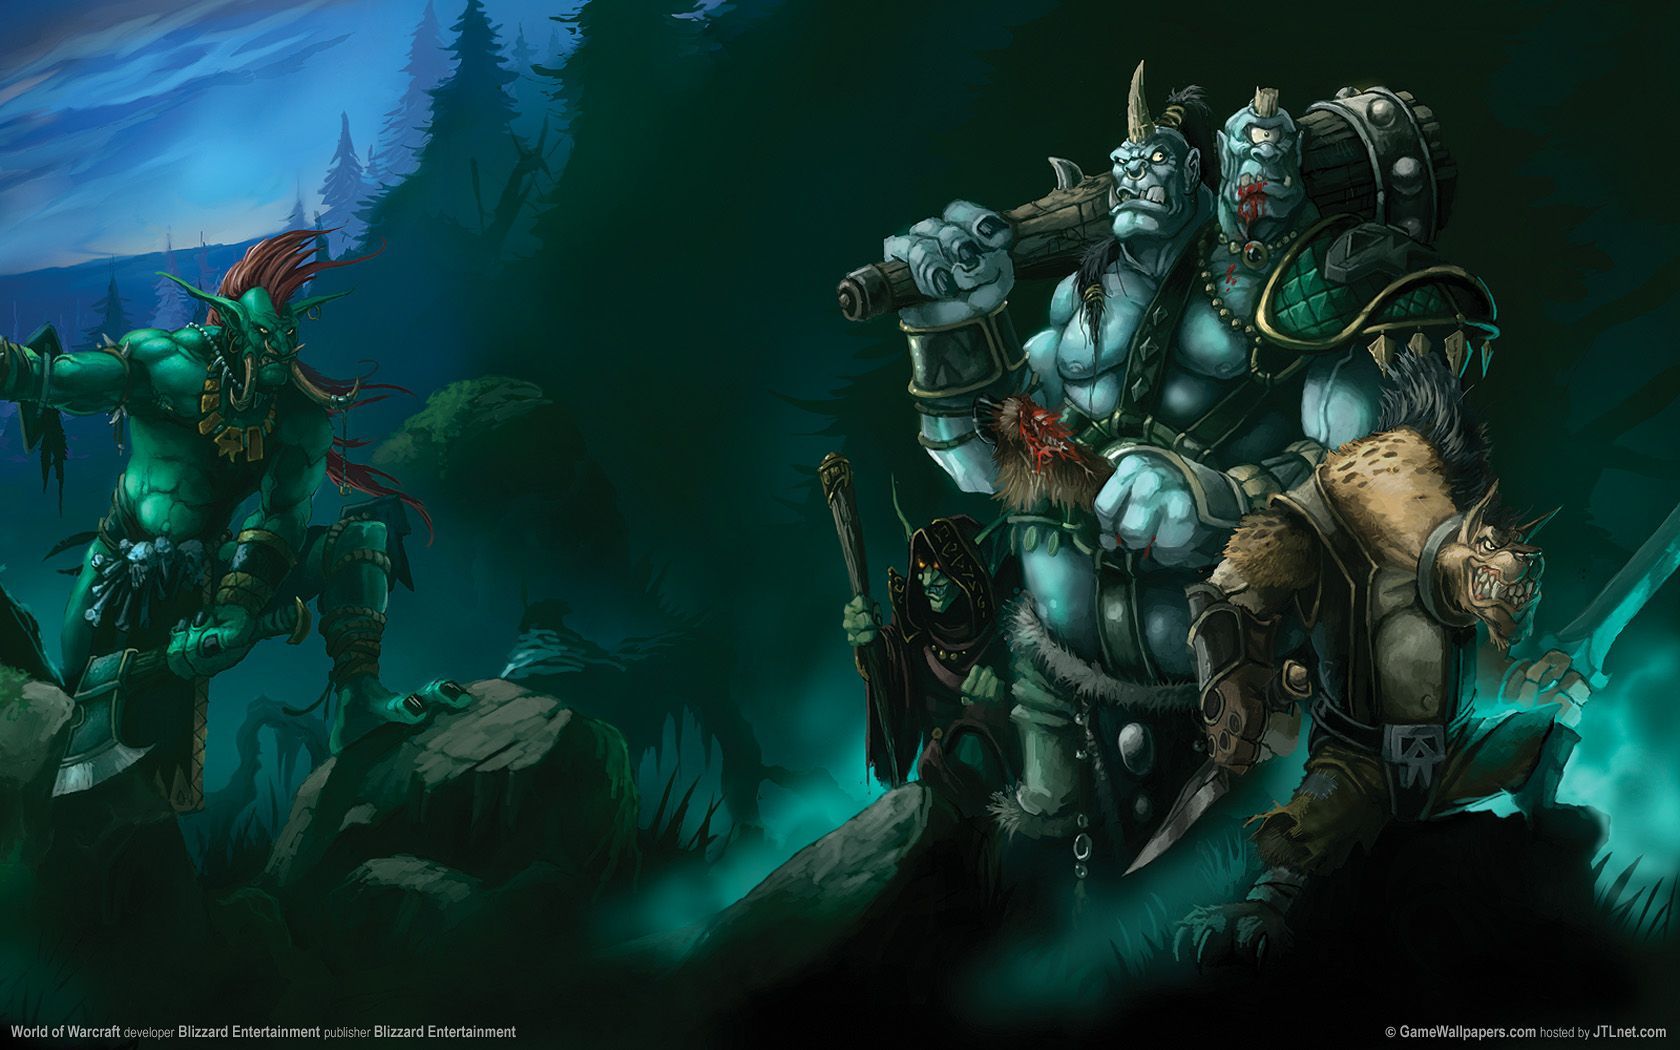 World of Warcraft wallpapers | World of Warcraft stock photos